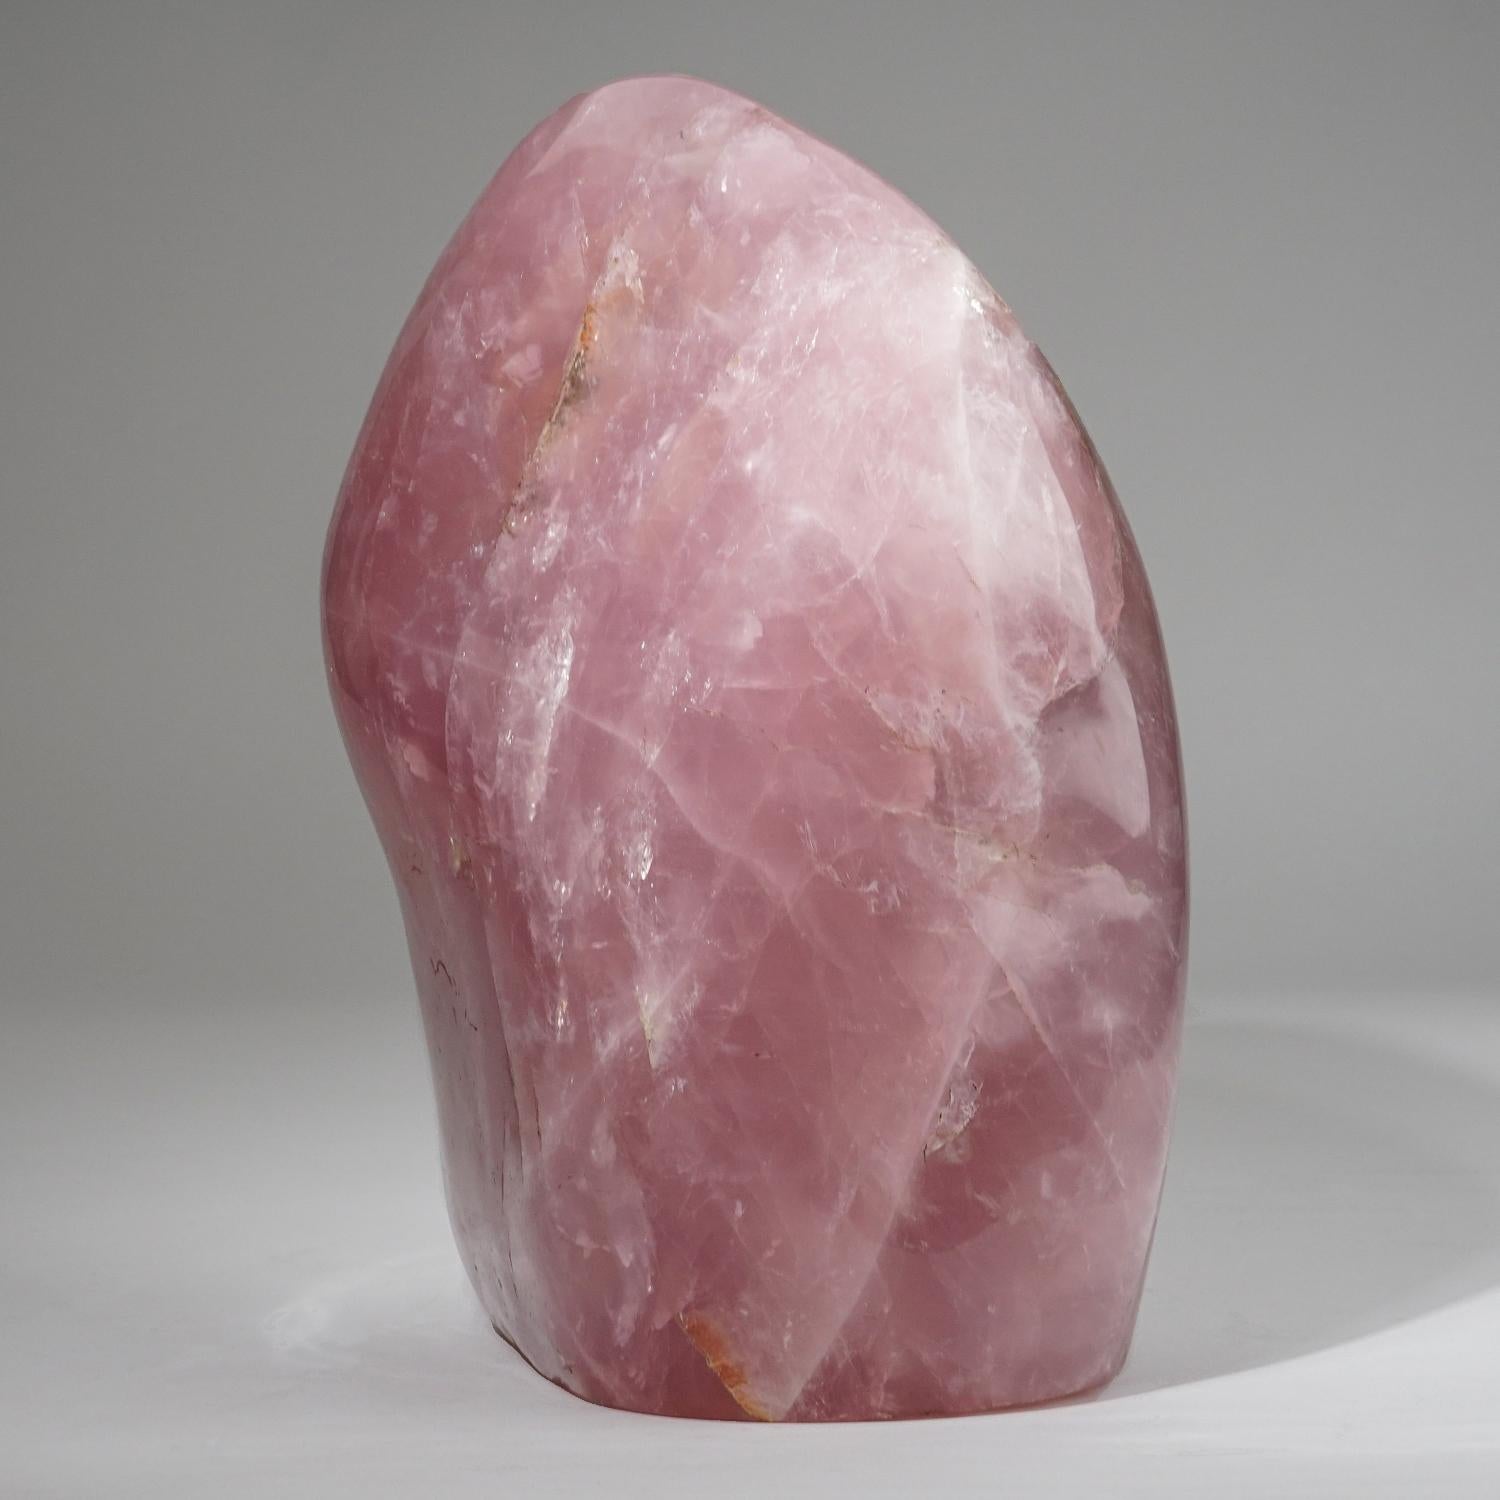 This museum quality, large freeform is carved from a solid piece of natural, gem quality Rose Quartz. This piece has remarkable transparency with a warm pink color. Hand polished to a mirrored finish.

Rose Quartz is the stone of unconditional love.